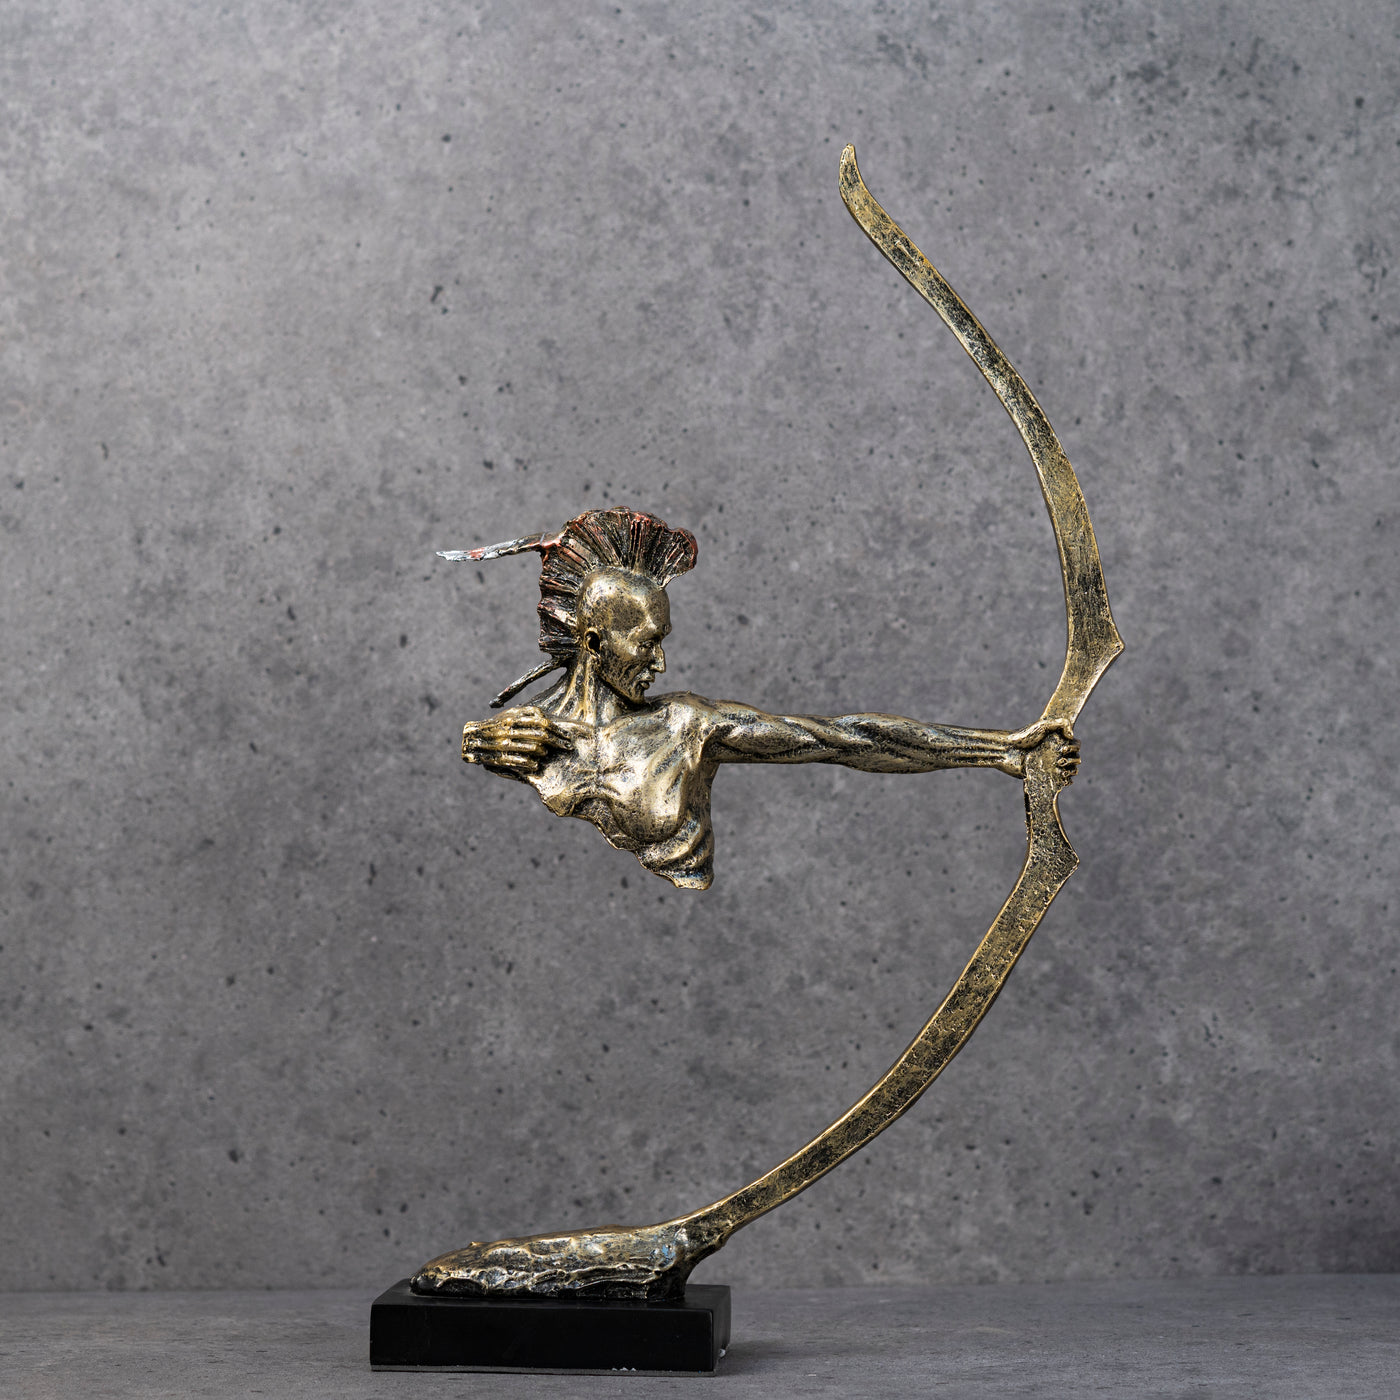 Golden Archer statue by Home 360